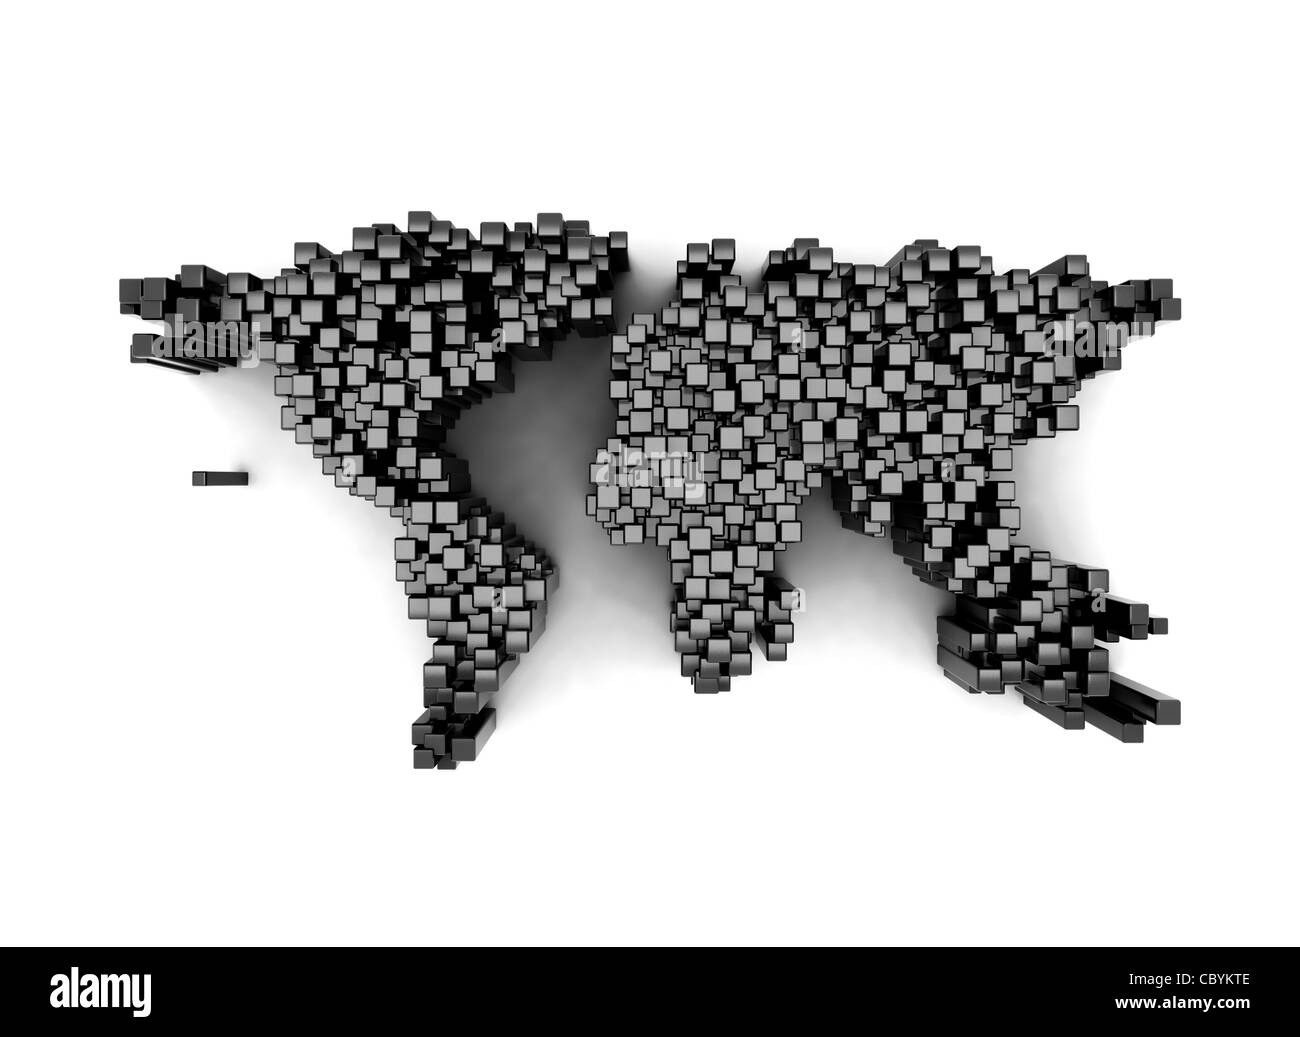 World map made of 3d cubes Stock Photo